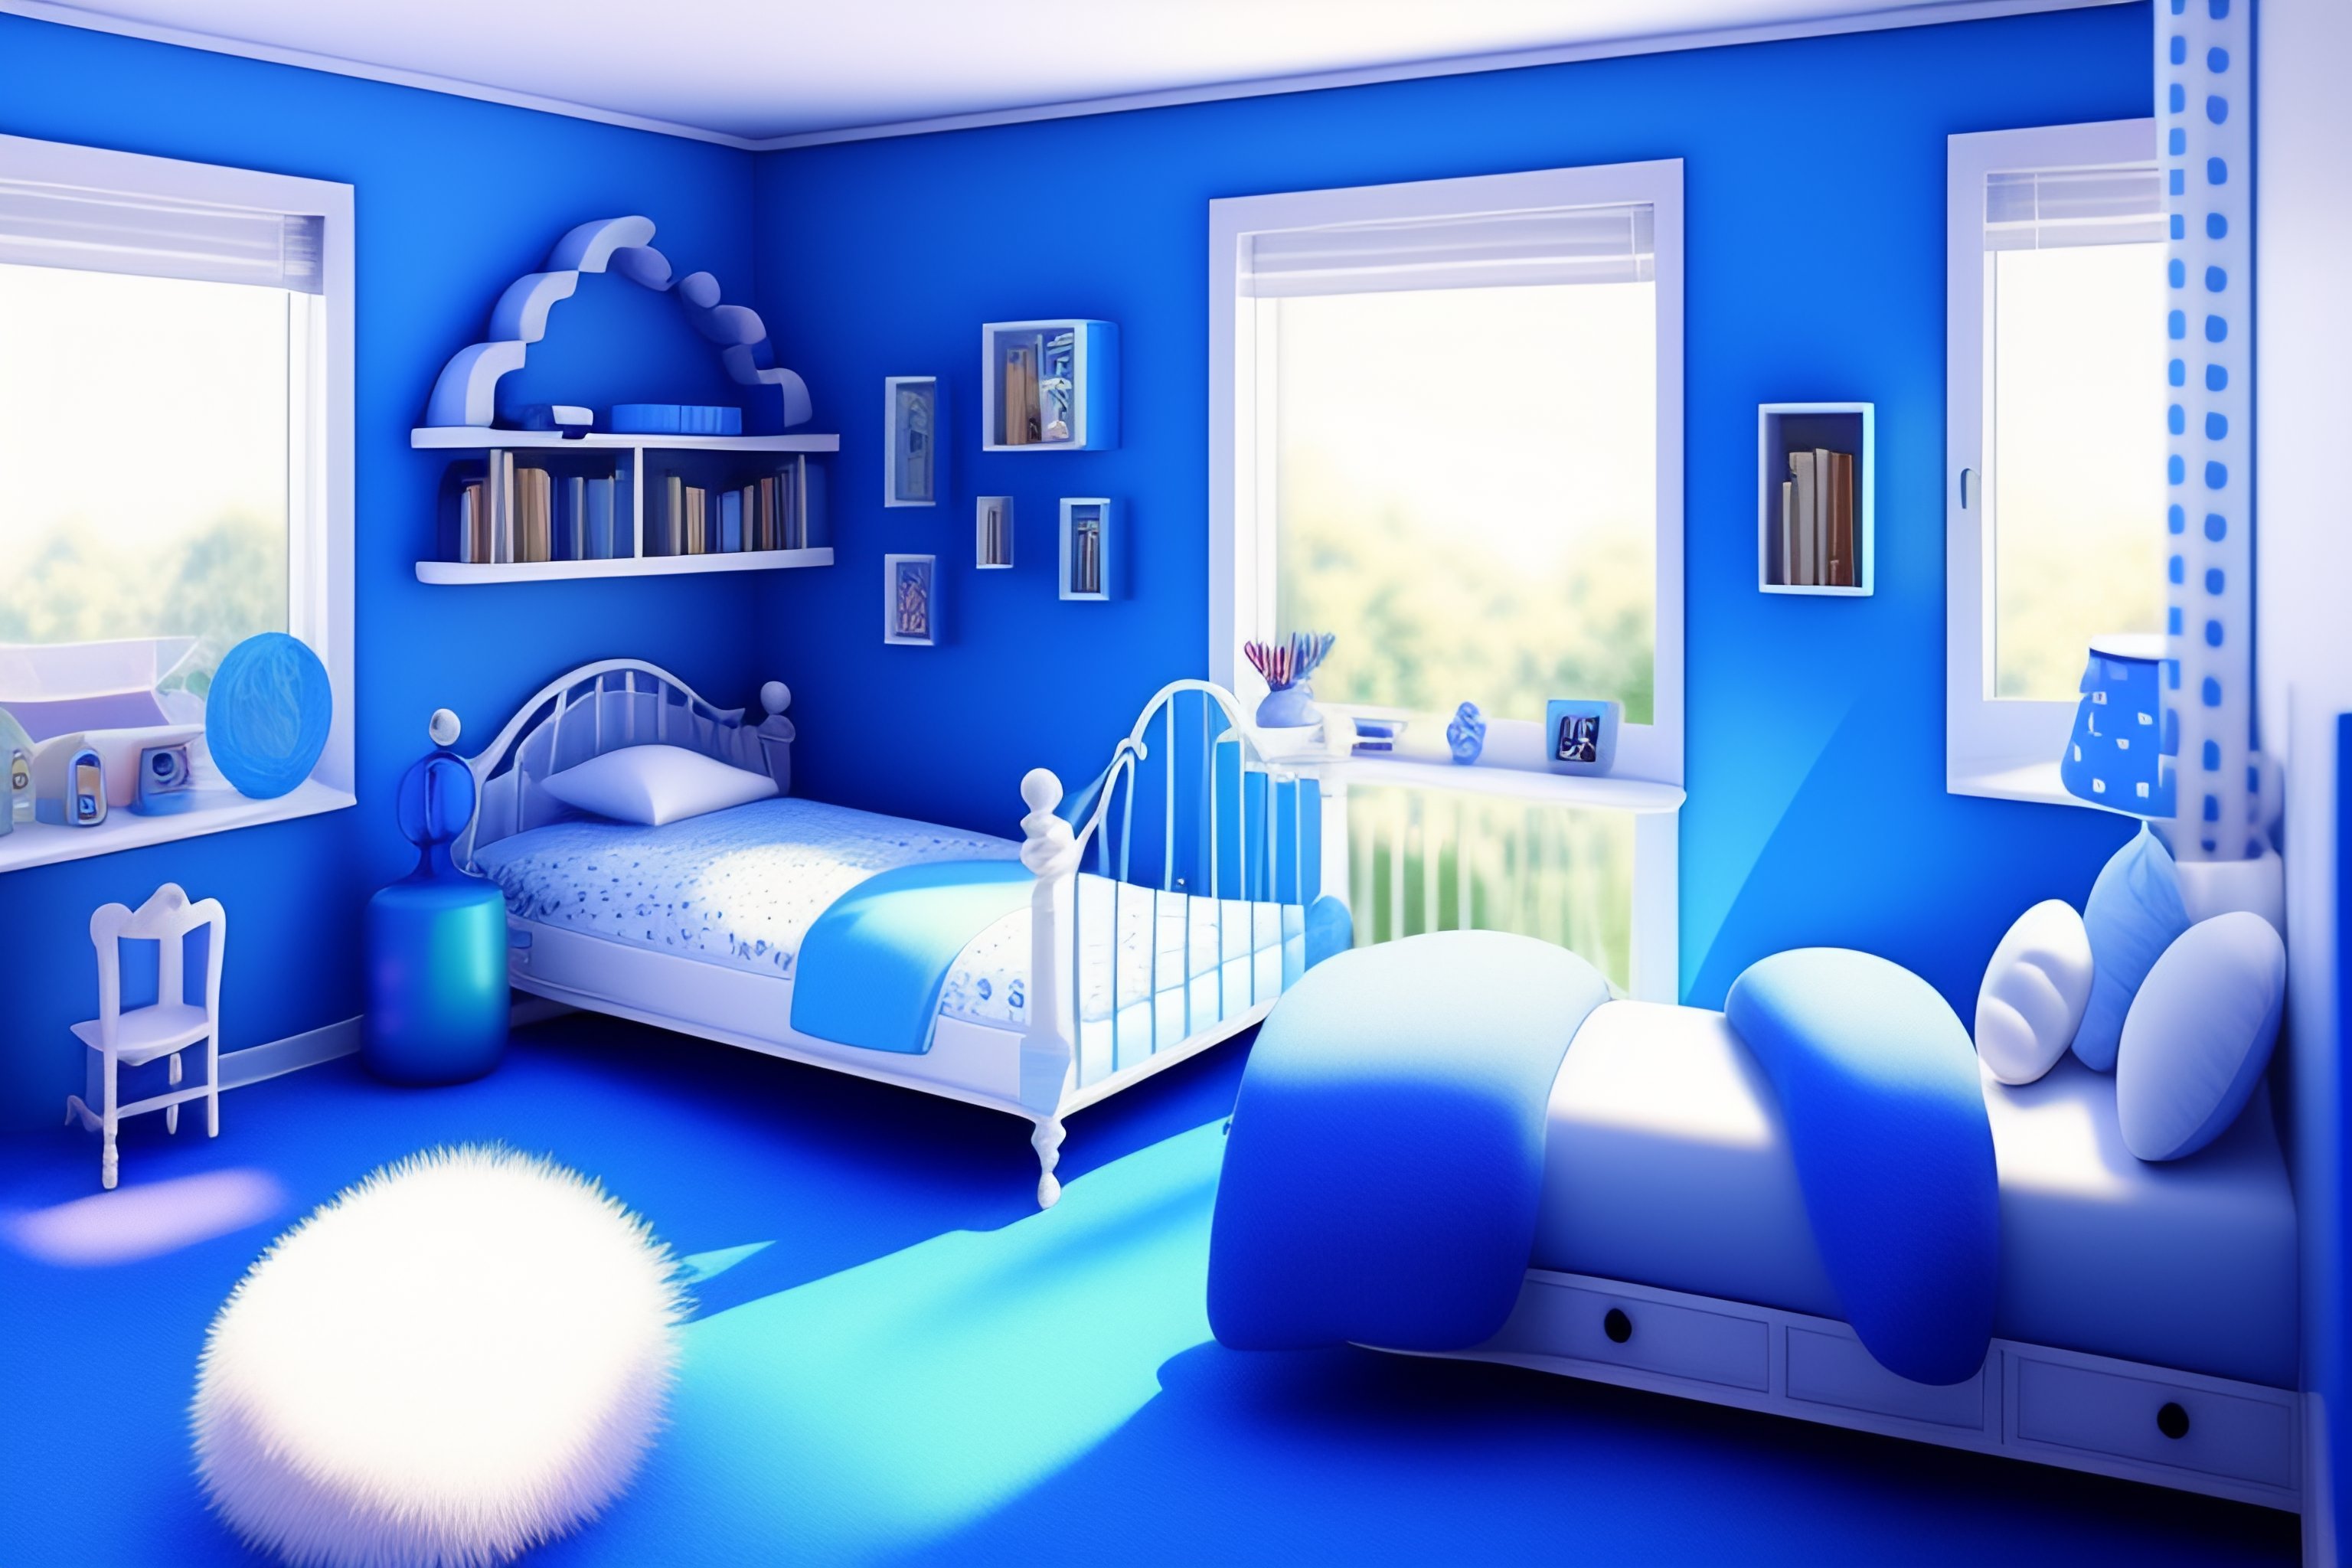 Lexica - Cute Drawing 2D side-on doll house room of a blue large